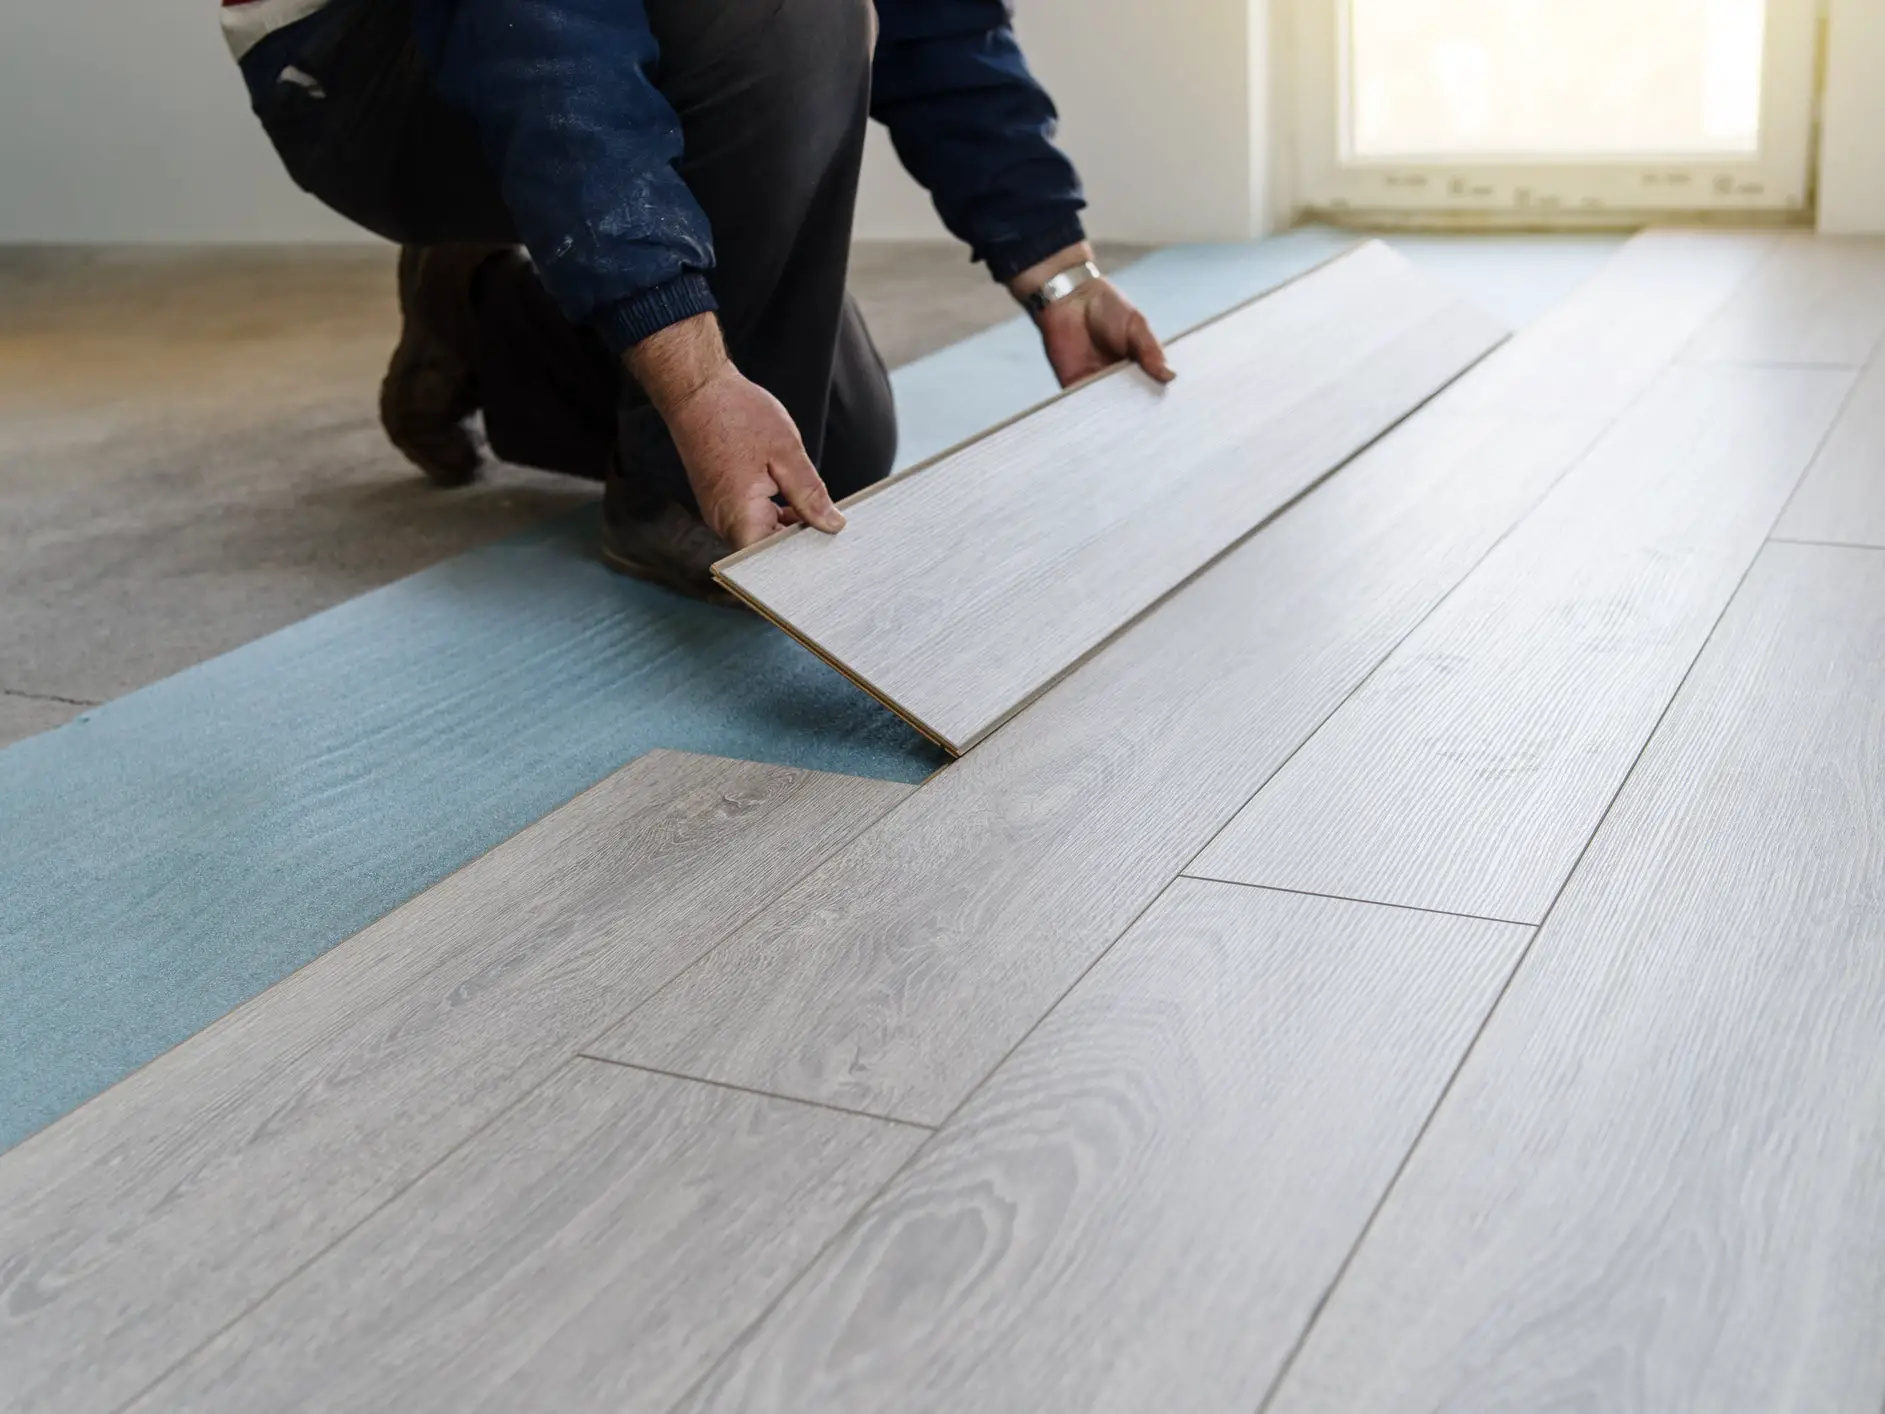 How To Install Temporary Flooring Over, Can I Install Laminate Flooring Over Carpet Padding